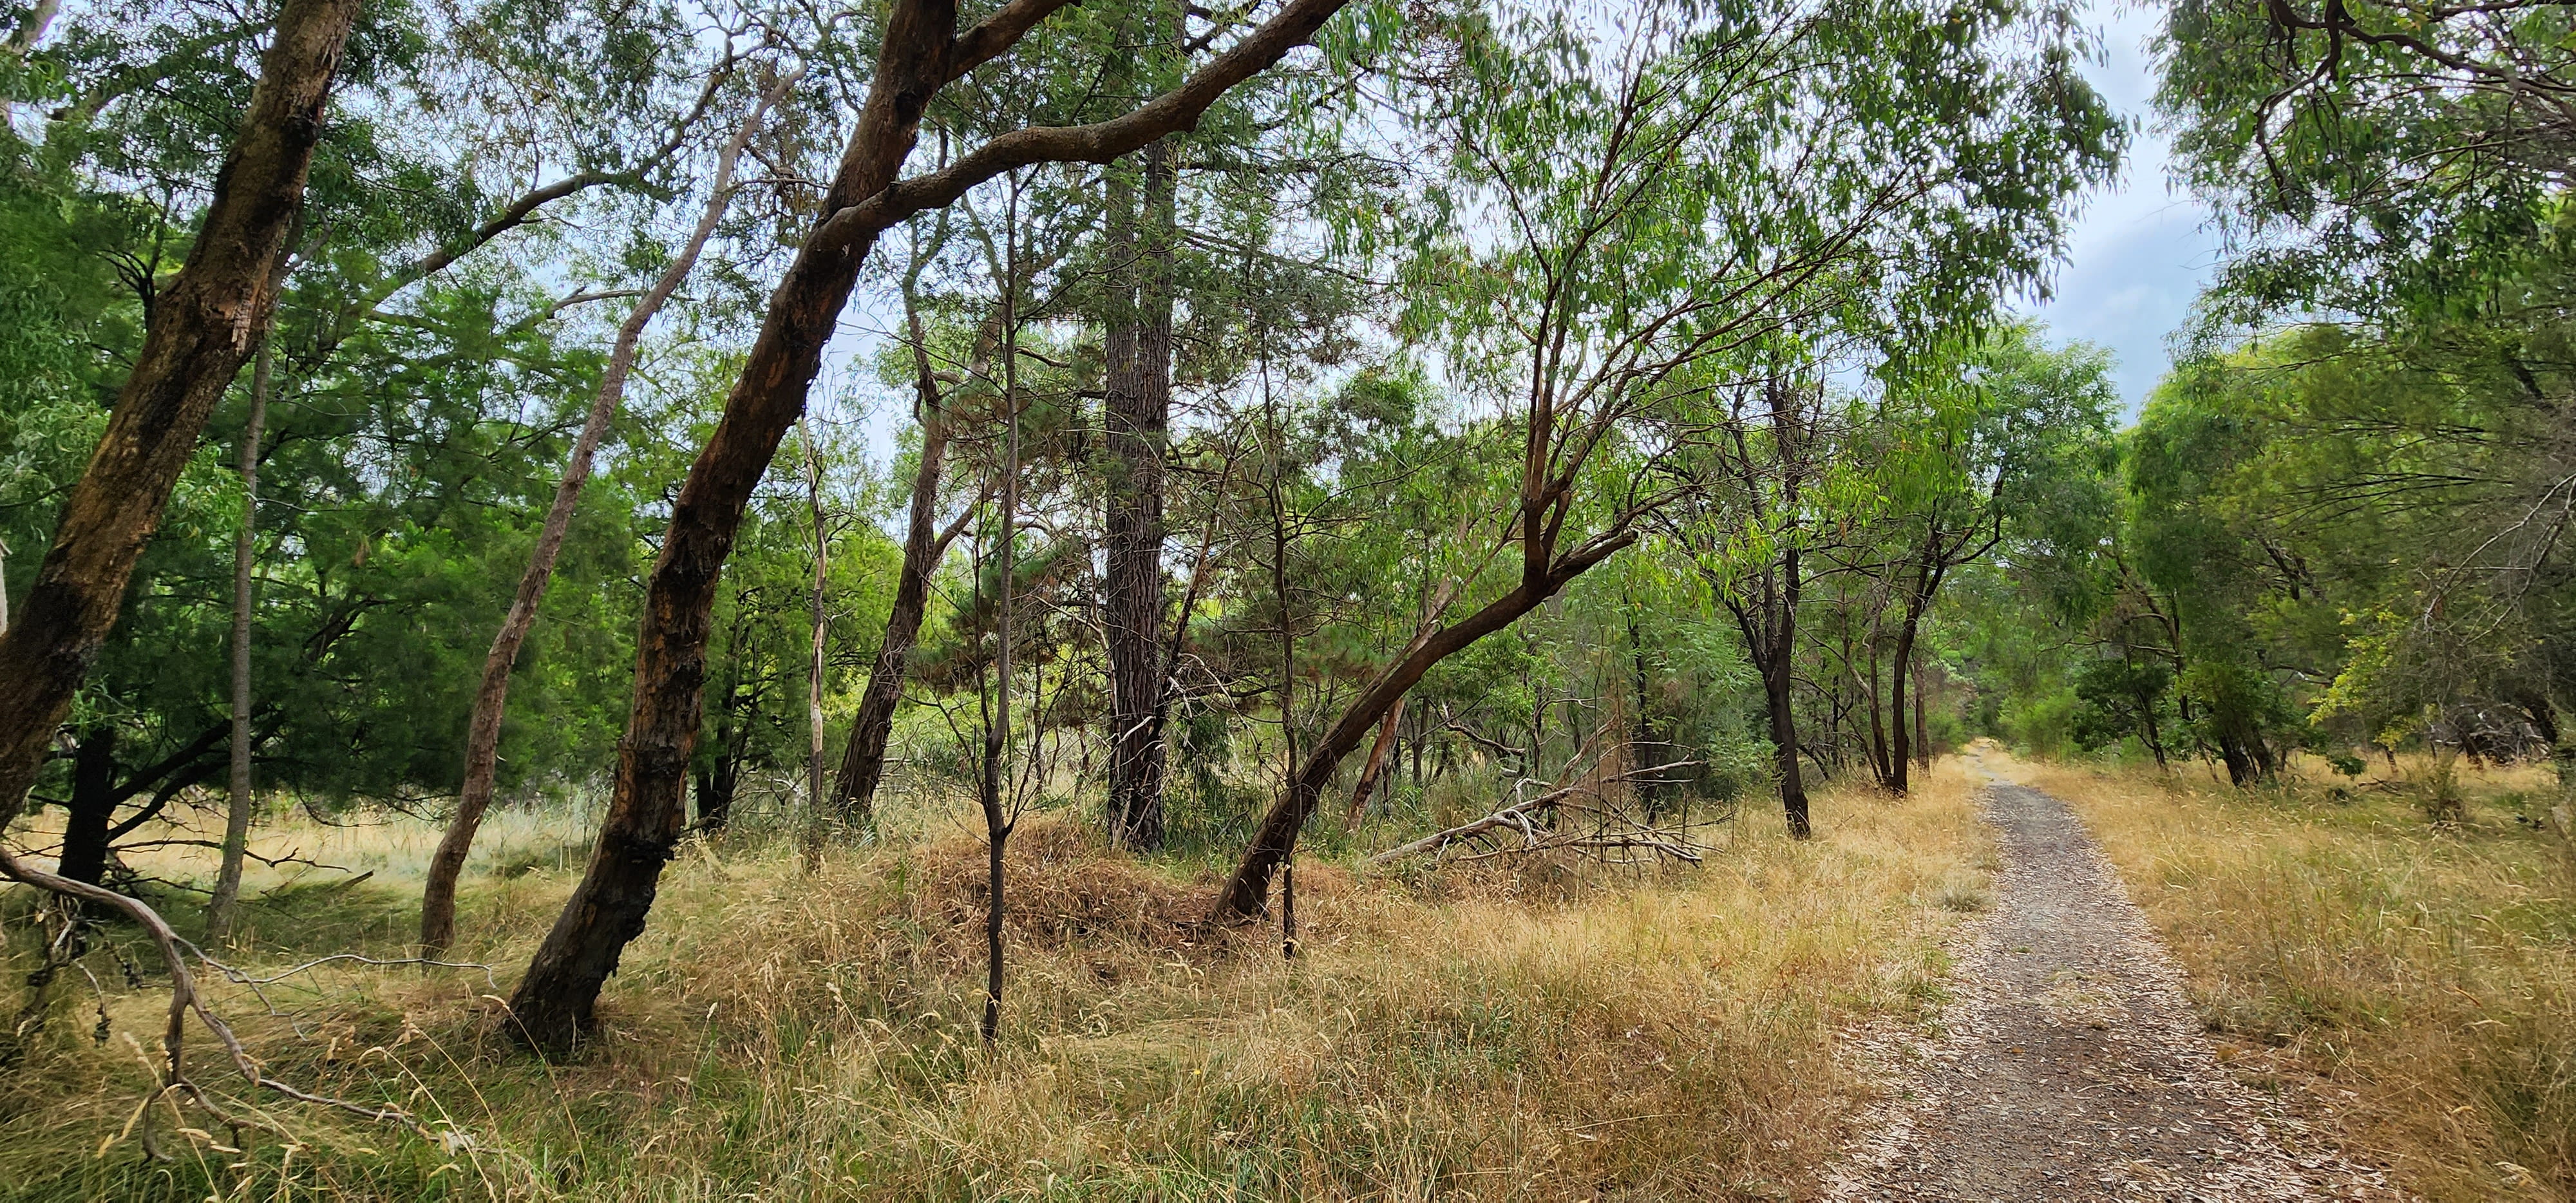 Image shows narrow gravel park surrounded by dried and overgrown grass. Crooked gum trees hang over the path.